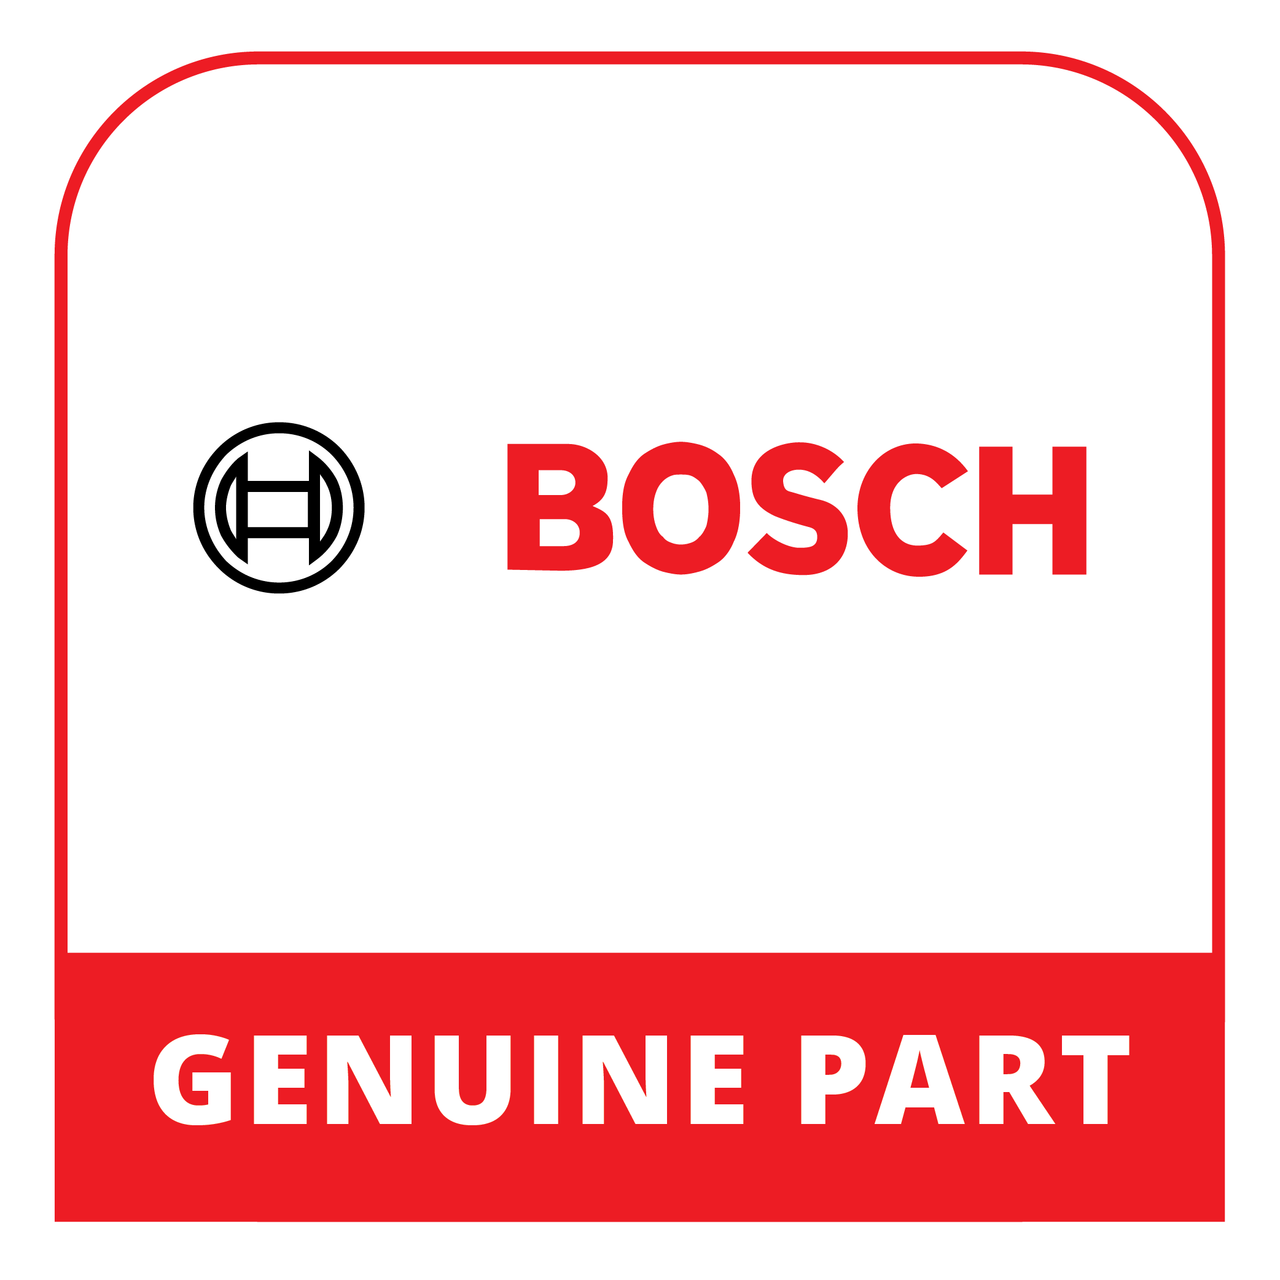 Bosch (Thermador) 11031748 - Display Module Programmed - Genuine Bosch (Thermador) Part